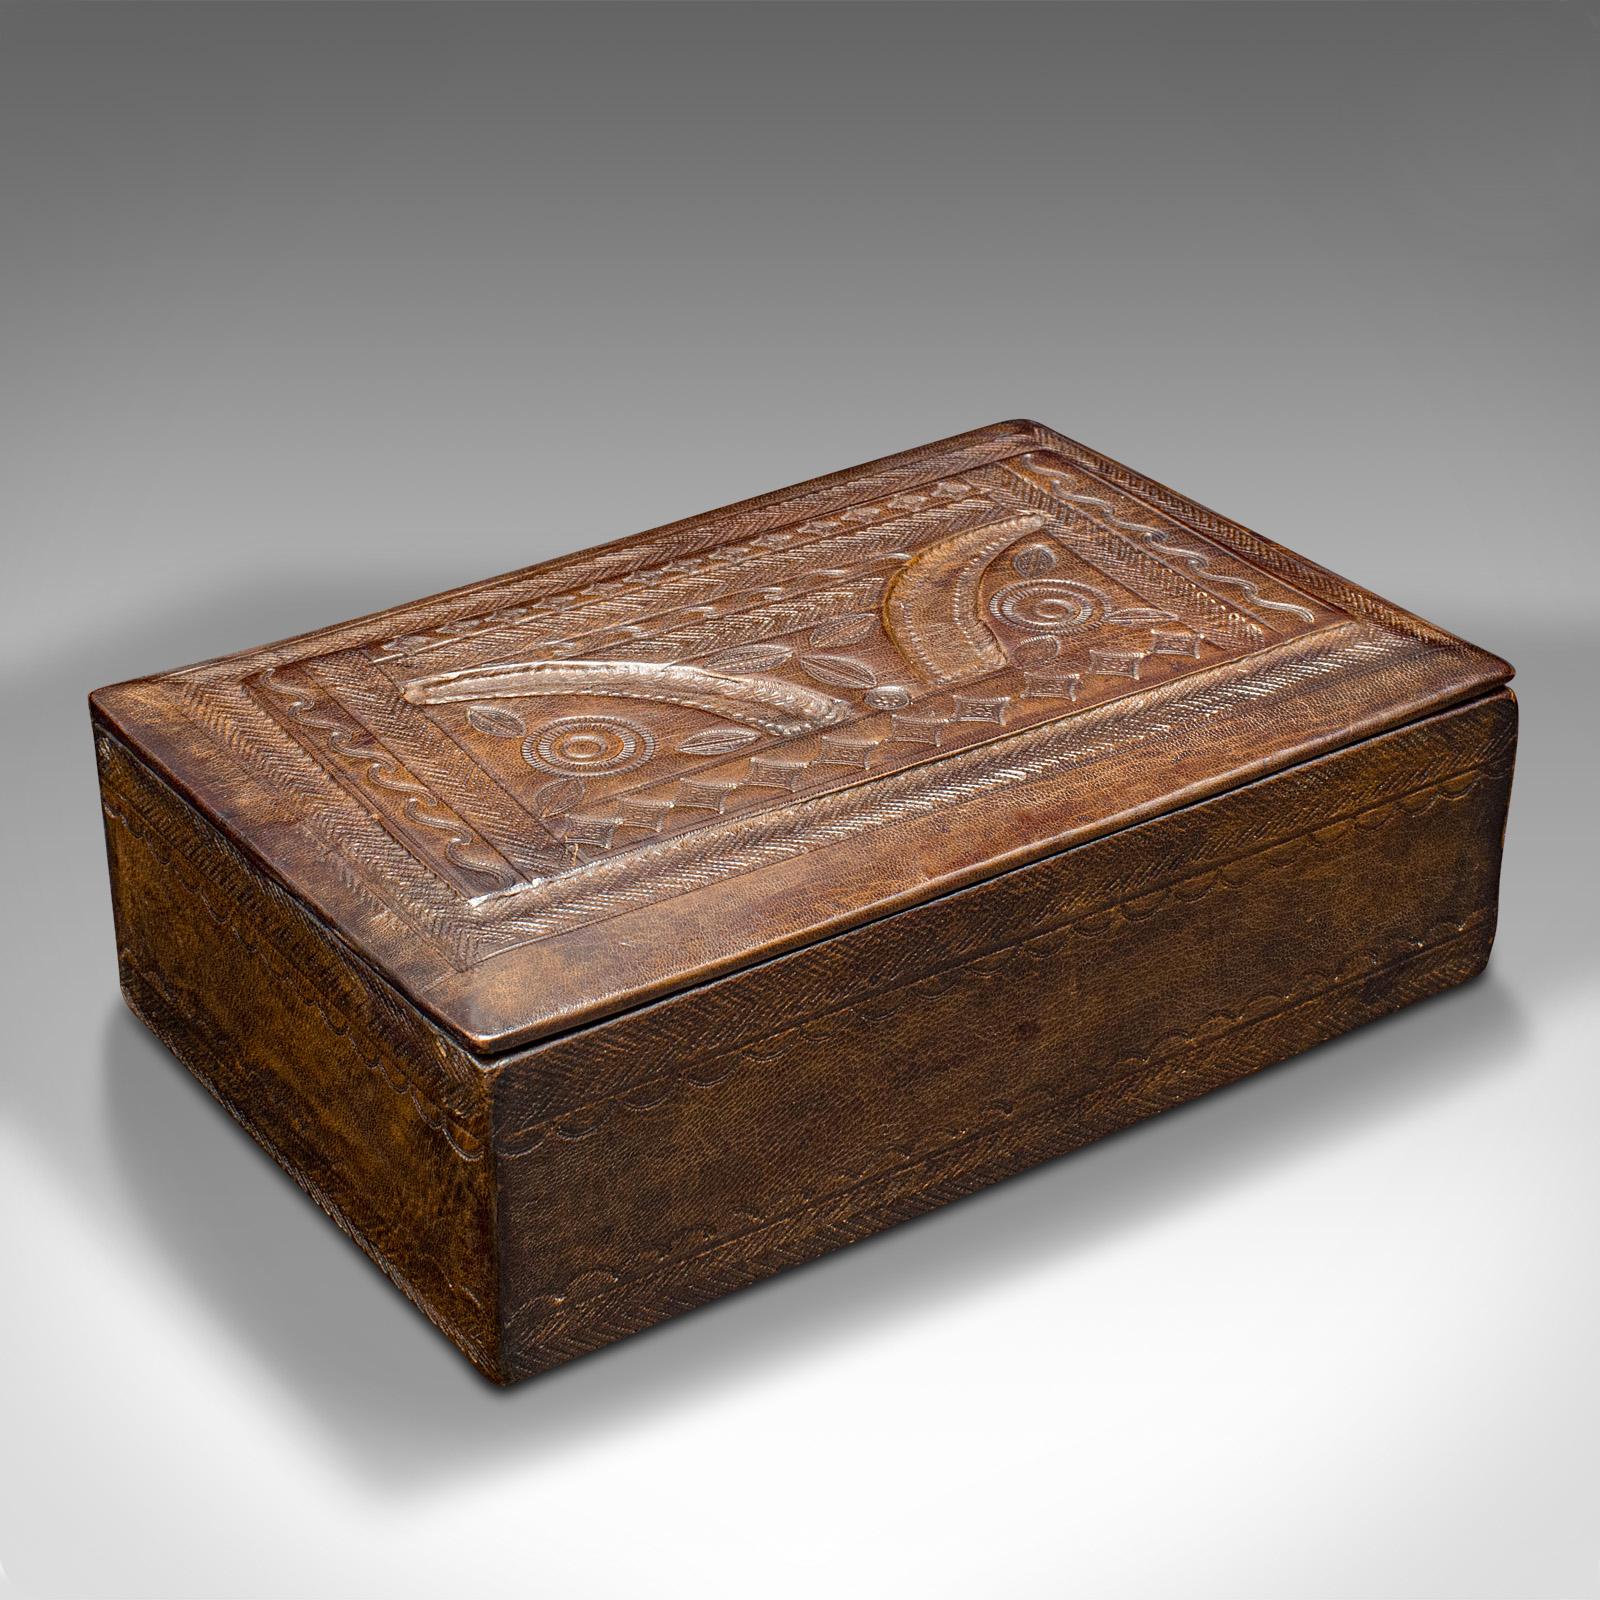 This is a vintage Tuareg hand-tooled box. An African, leather decorative case, dating to the mid 20th century, circa 1960.

Appealing leather work with a tooled decorative lid
Displays a desirable aged patina and in good original order
Leather